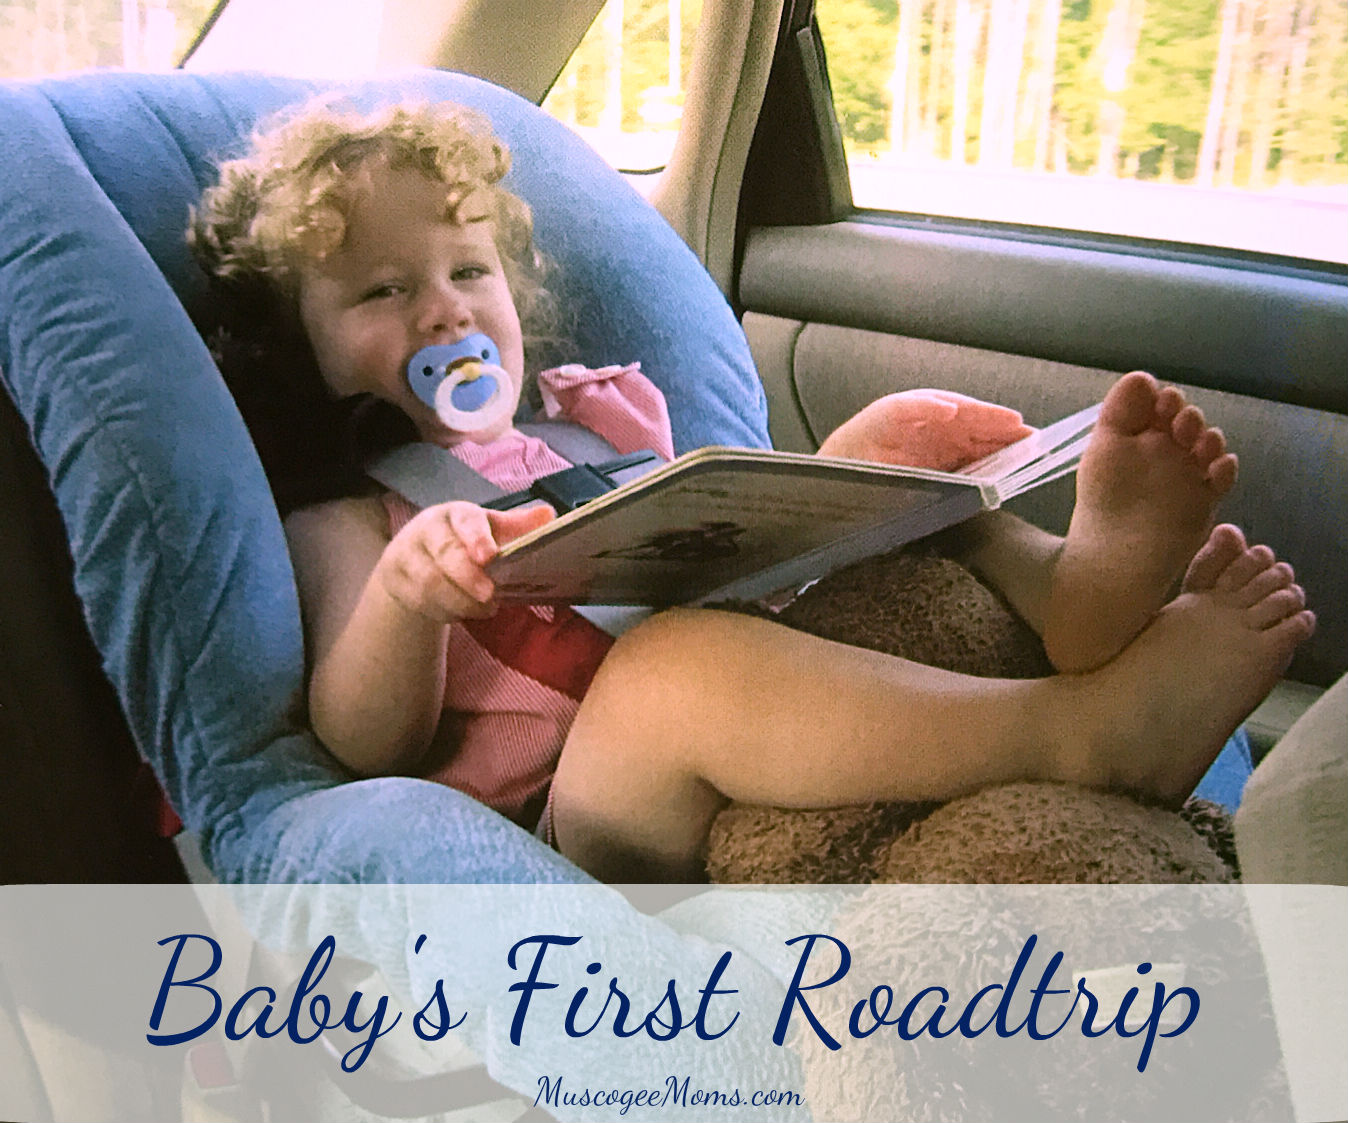 Planning Baby’s First Road Trip